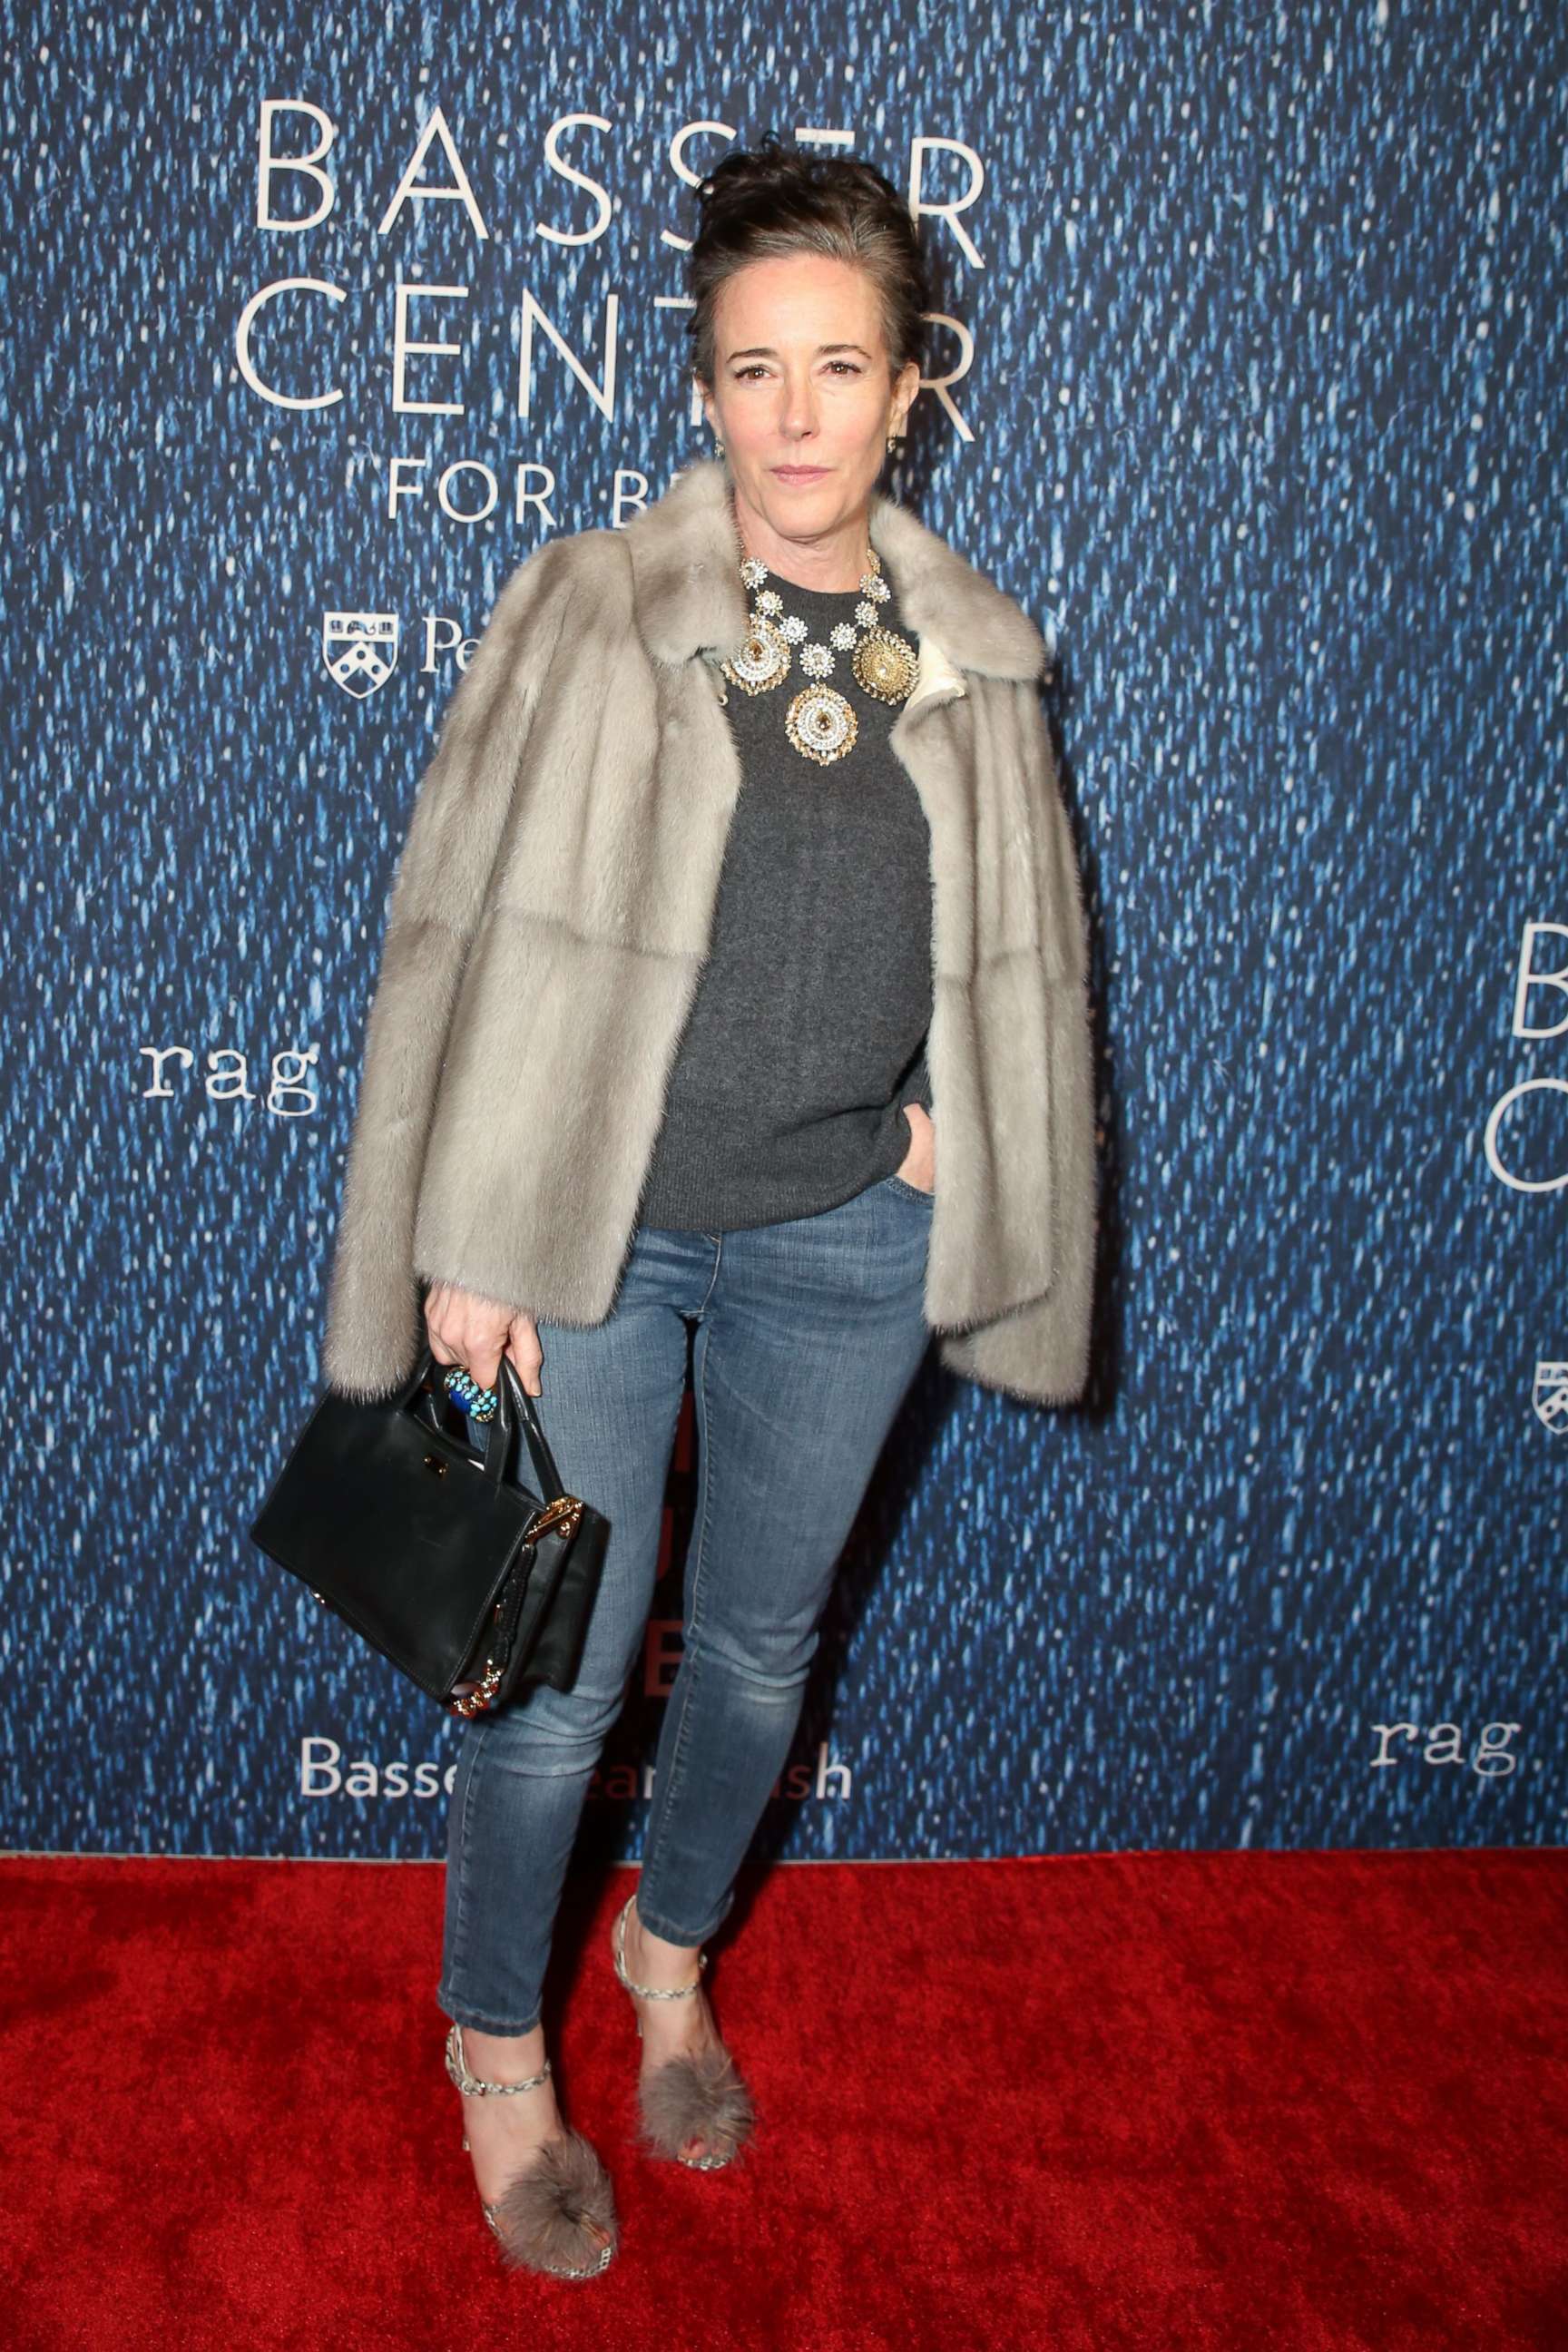 PHOTO: Kate Spade arrives at The Basser Center for BRCA Inaugural Benefit Dinner with Rag & Bone, New York, Nov. 10, 2015.